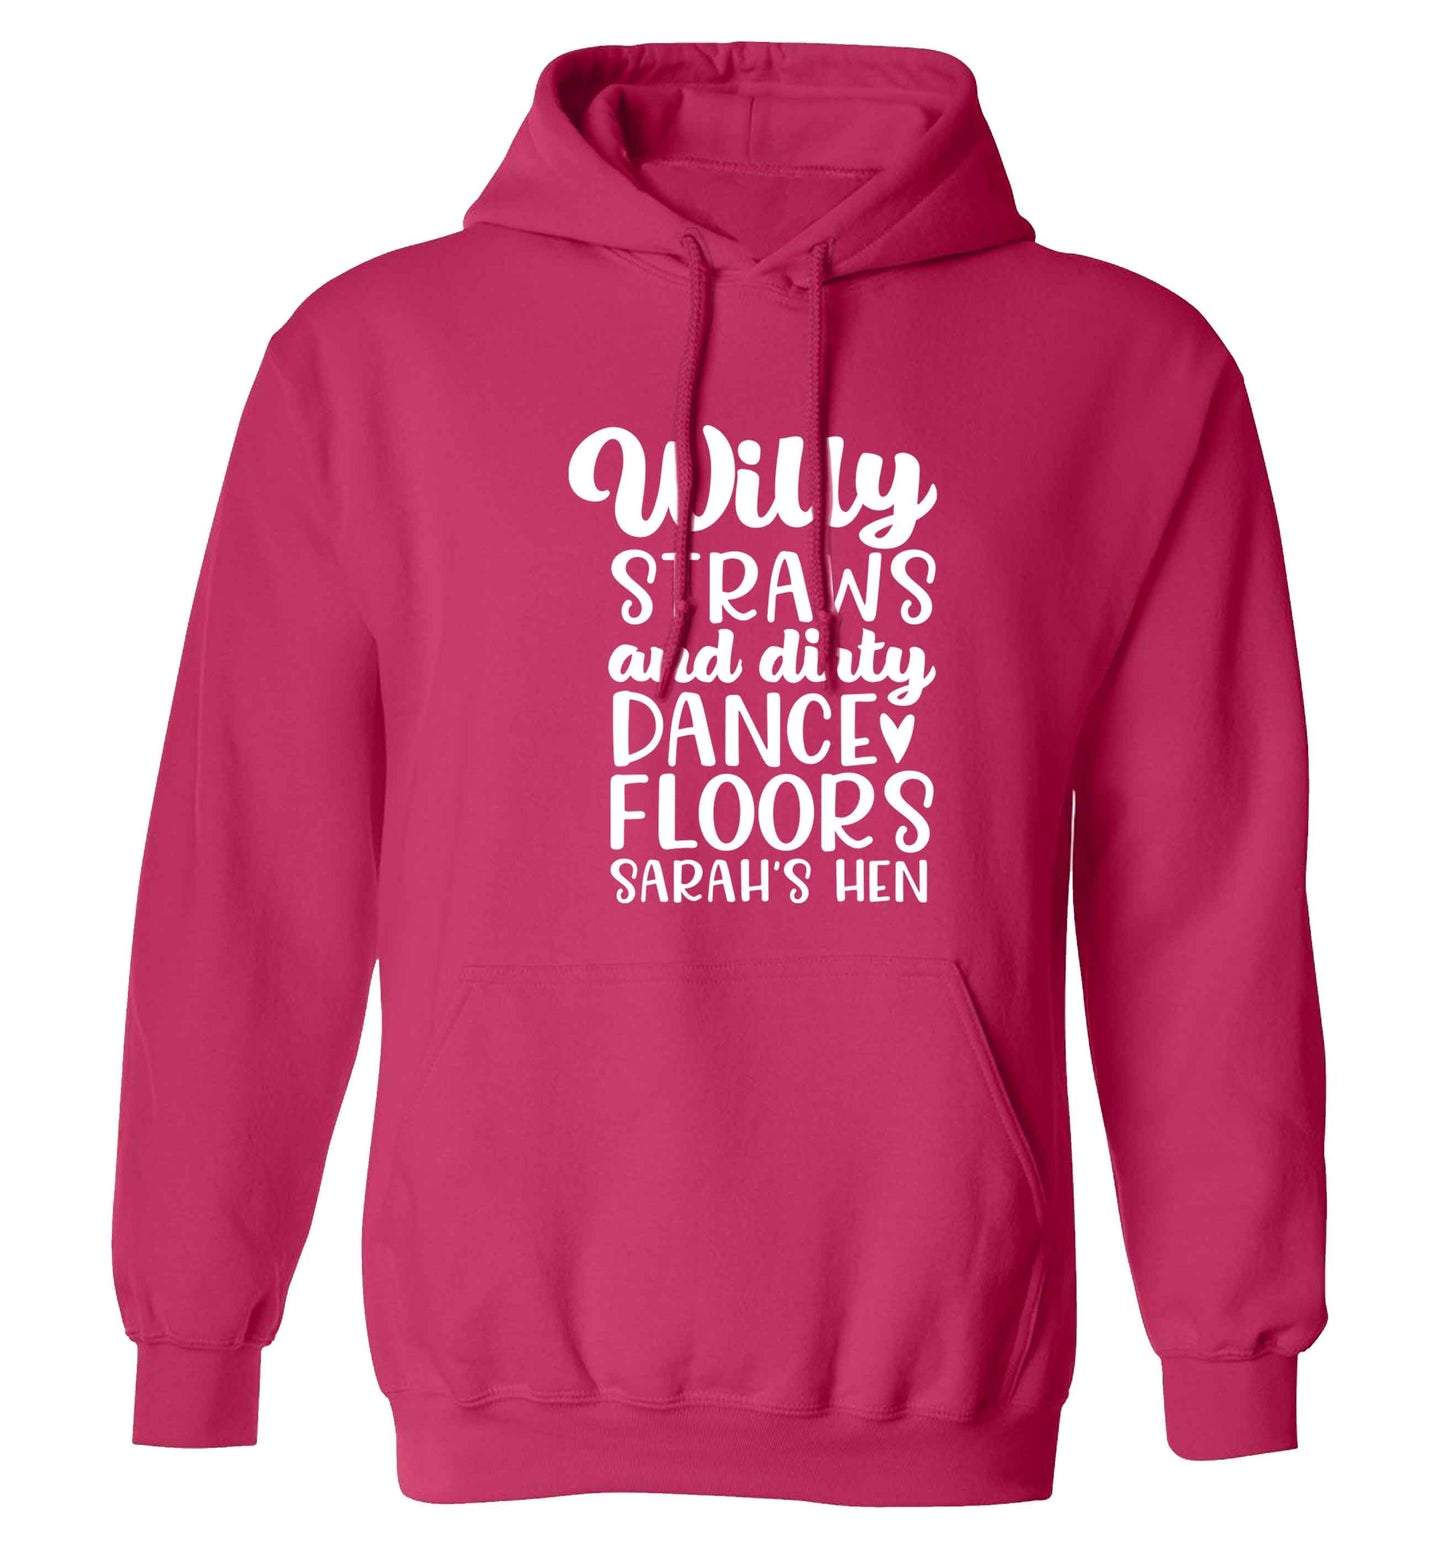 Willy straws and dirty dance floors adults unisex pink hoodie 2XL